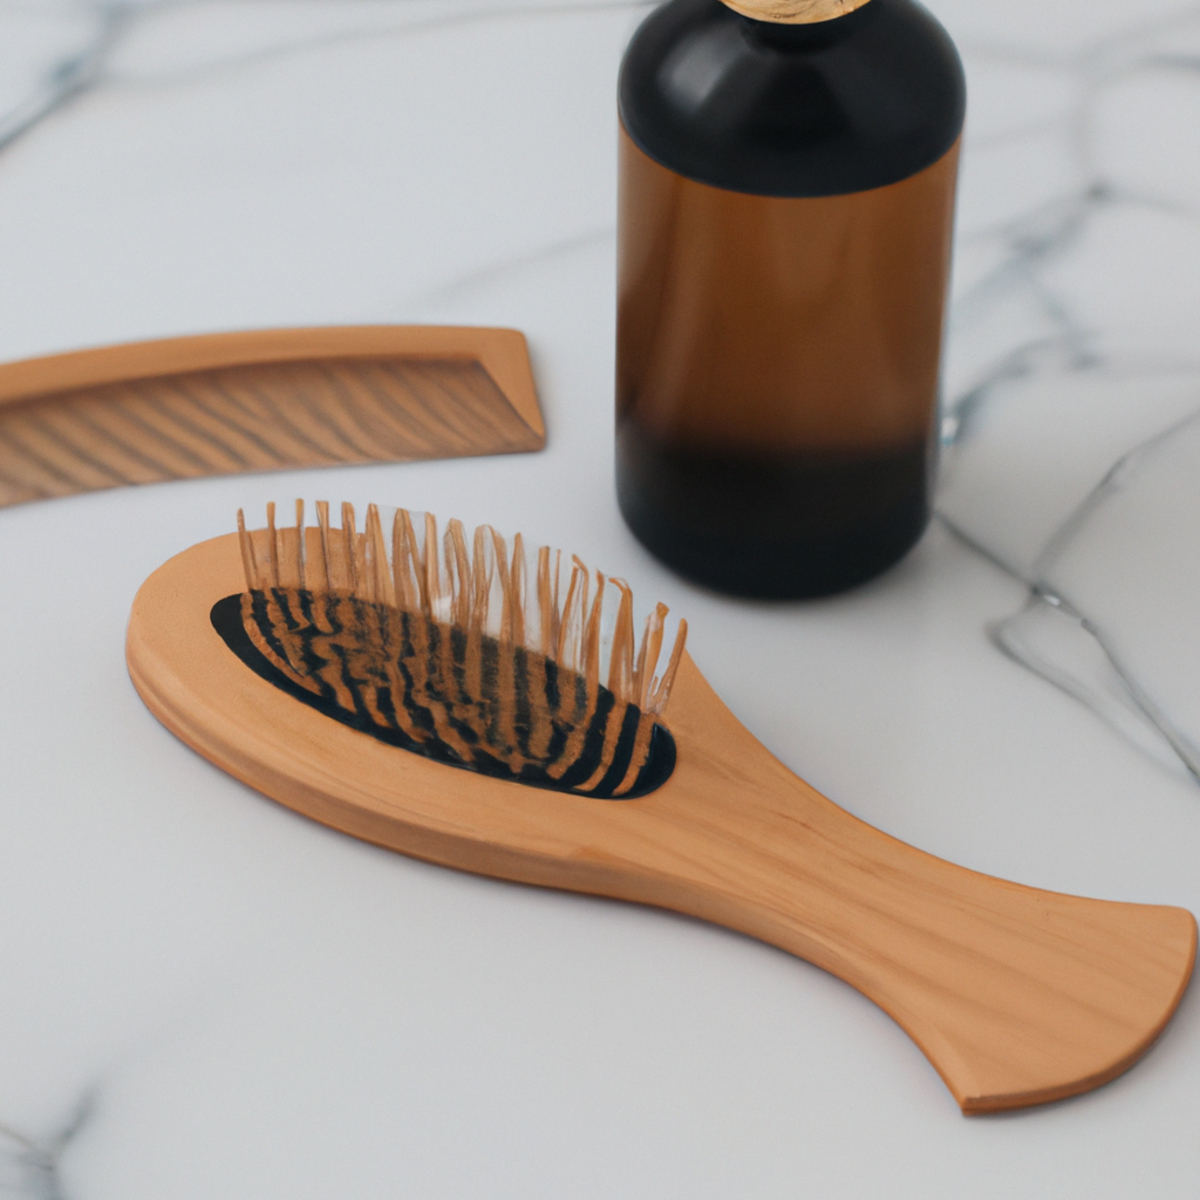 Hair care essentials for men with thinning hair: wooden comb, hair growth serum, and soft-bristled brush on marble countertop.